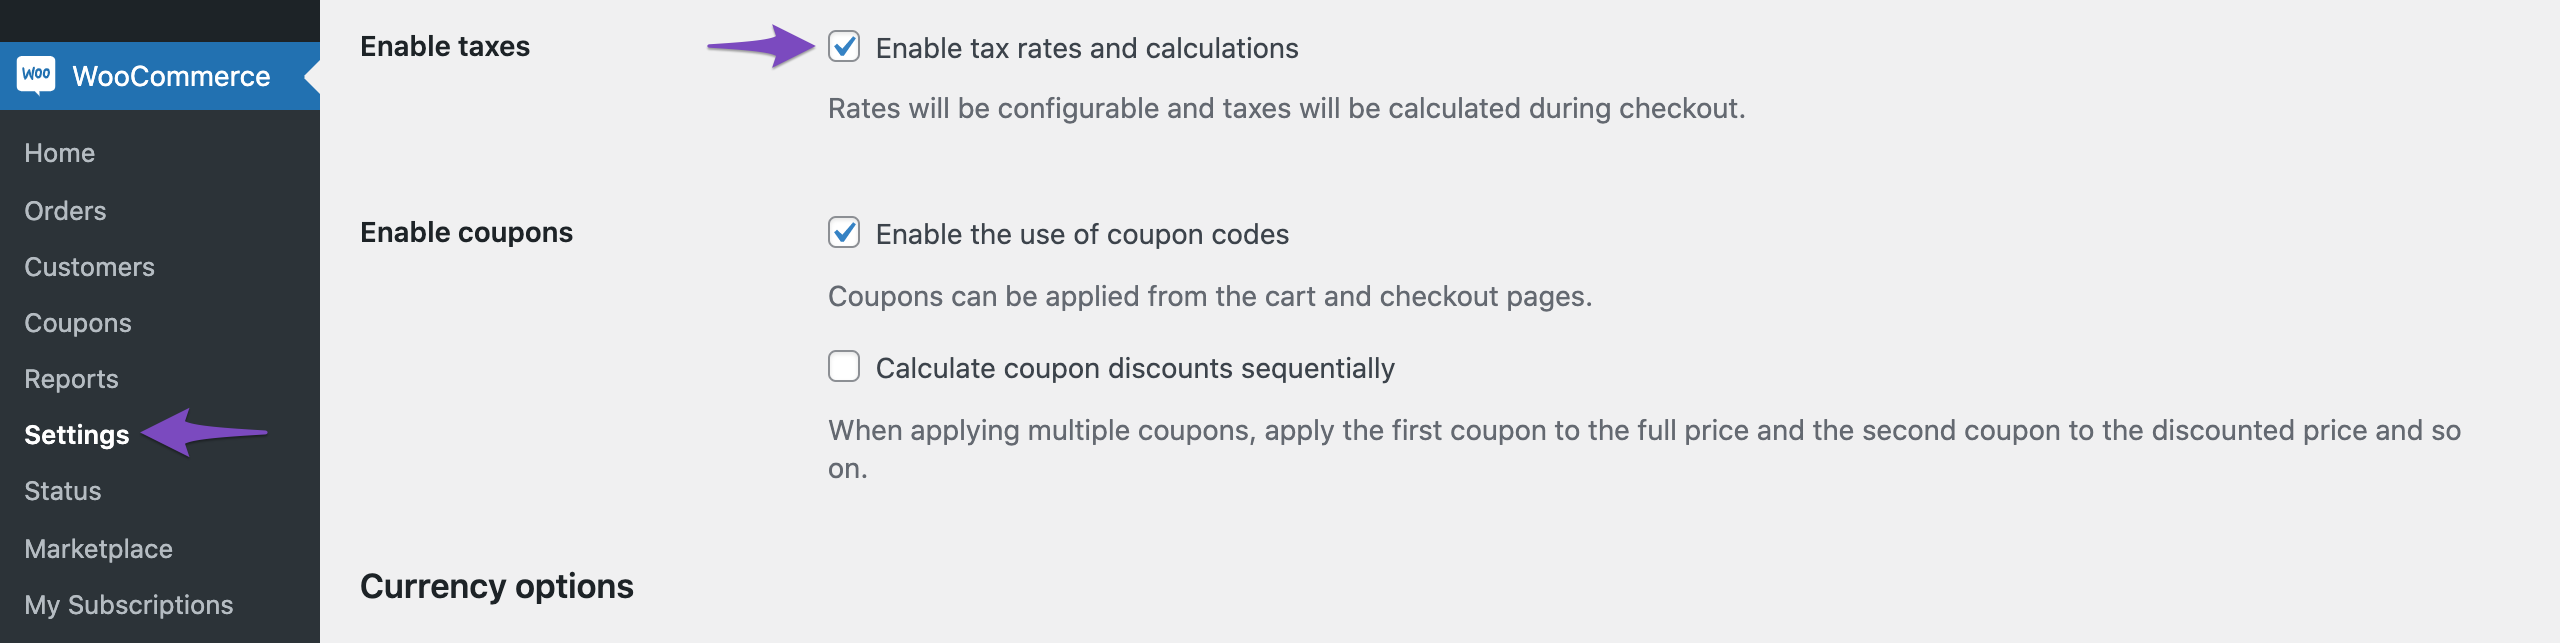 Enable Tax rates and calculations